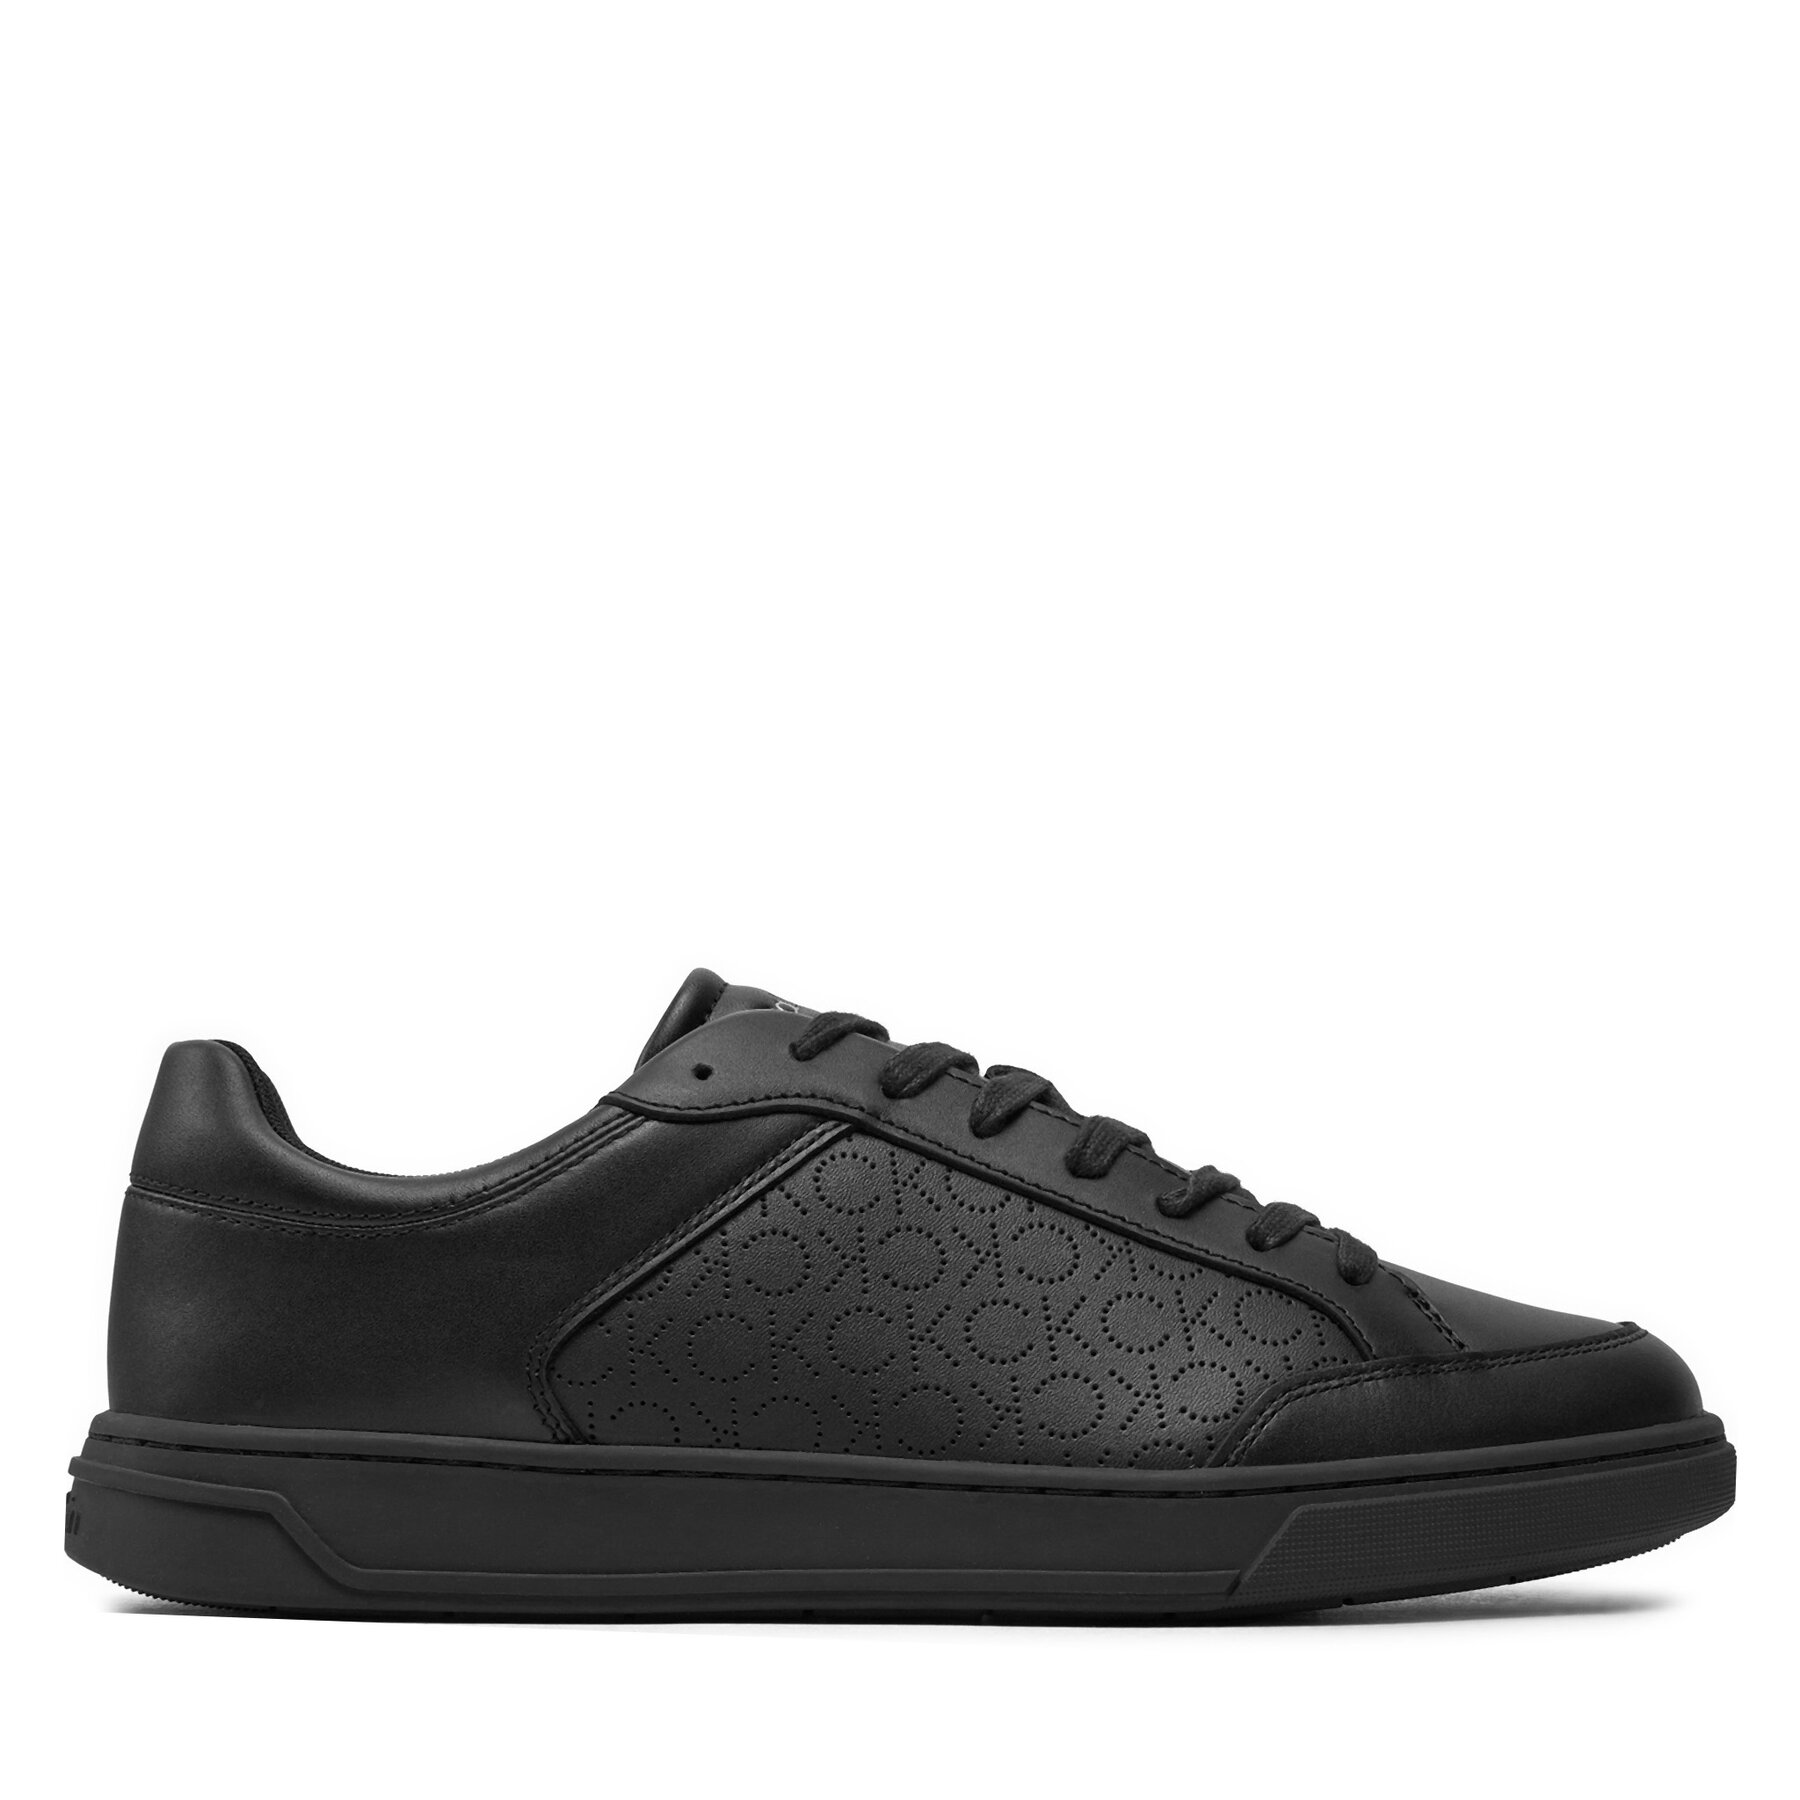 Sneakers Calvin Klein Low Top Lace Up Lth Perf Mono HM0HM01428 Black Perf Mono 0GL von Calvin Klein